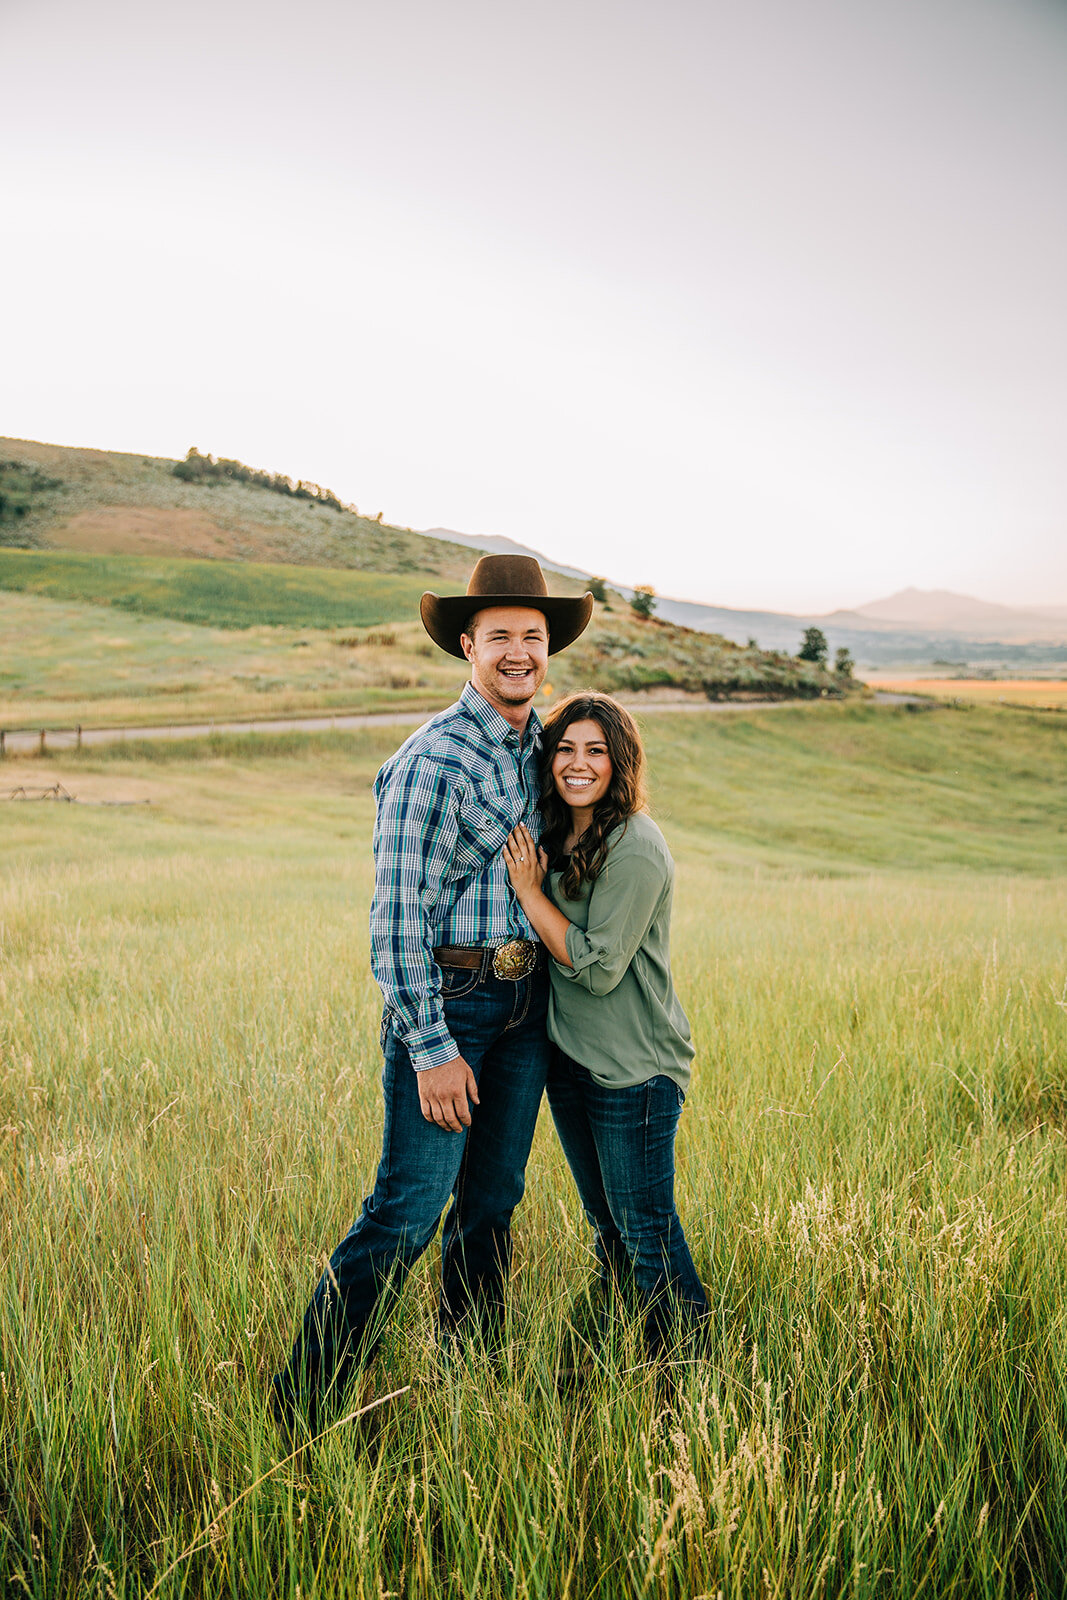  engagement session small town love country love swing dancing cowboy hat grass fields what to wear to engagements couple posing ideas professional cache valley photographer cache valley wedding photographer simple posing engagement picture inspo sta